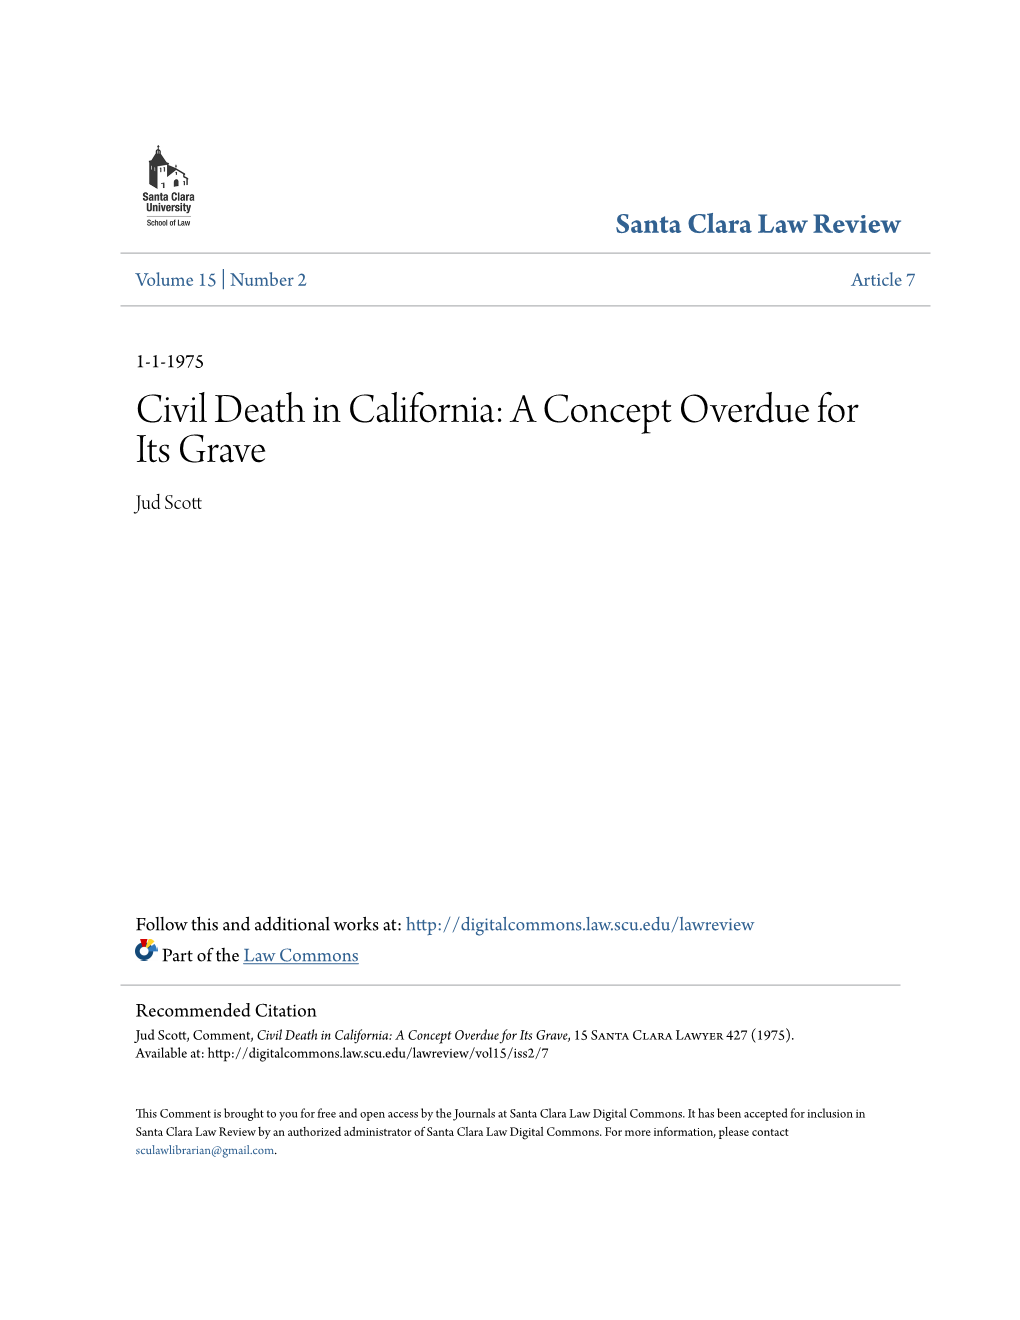 Civil Death in California: a Concept Overdue for Its Grave Jud Scott